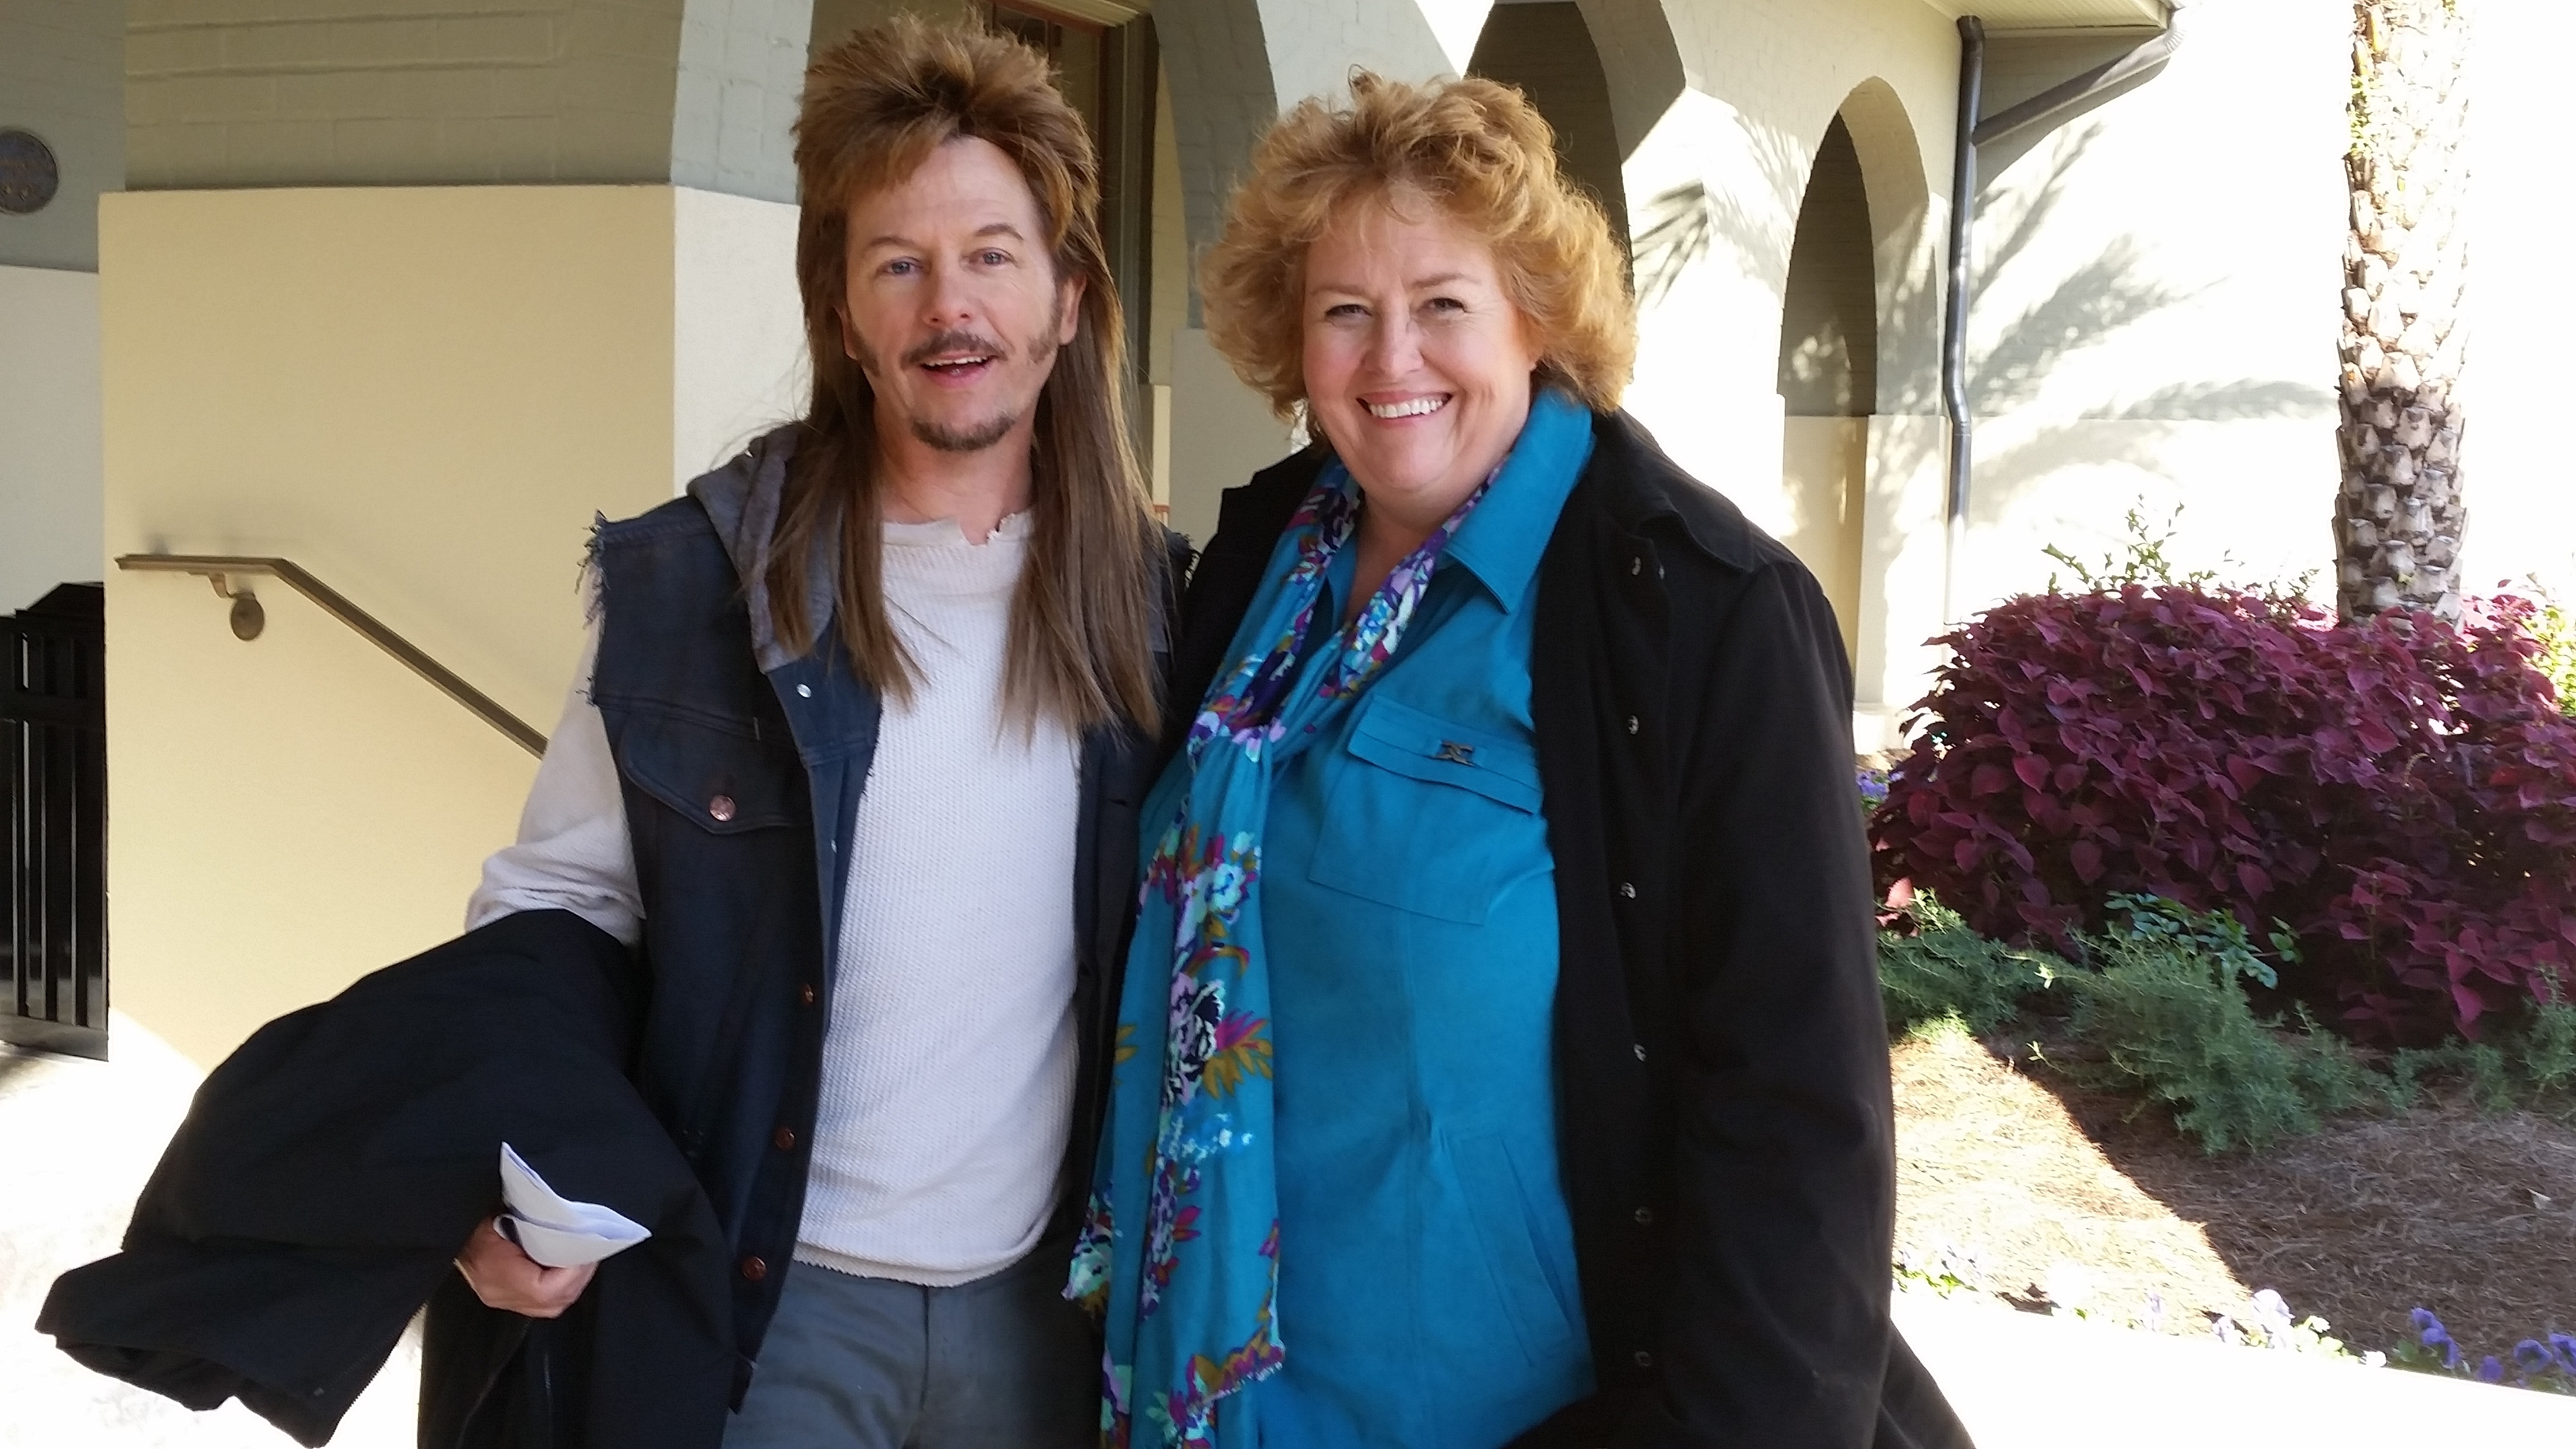 Another shot of Tracy Weisert & David Spade in New Orleans on the set of JOE DIRT 2, Day 1 of shooting November 17, 2014.